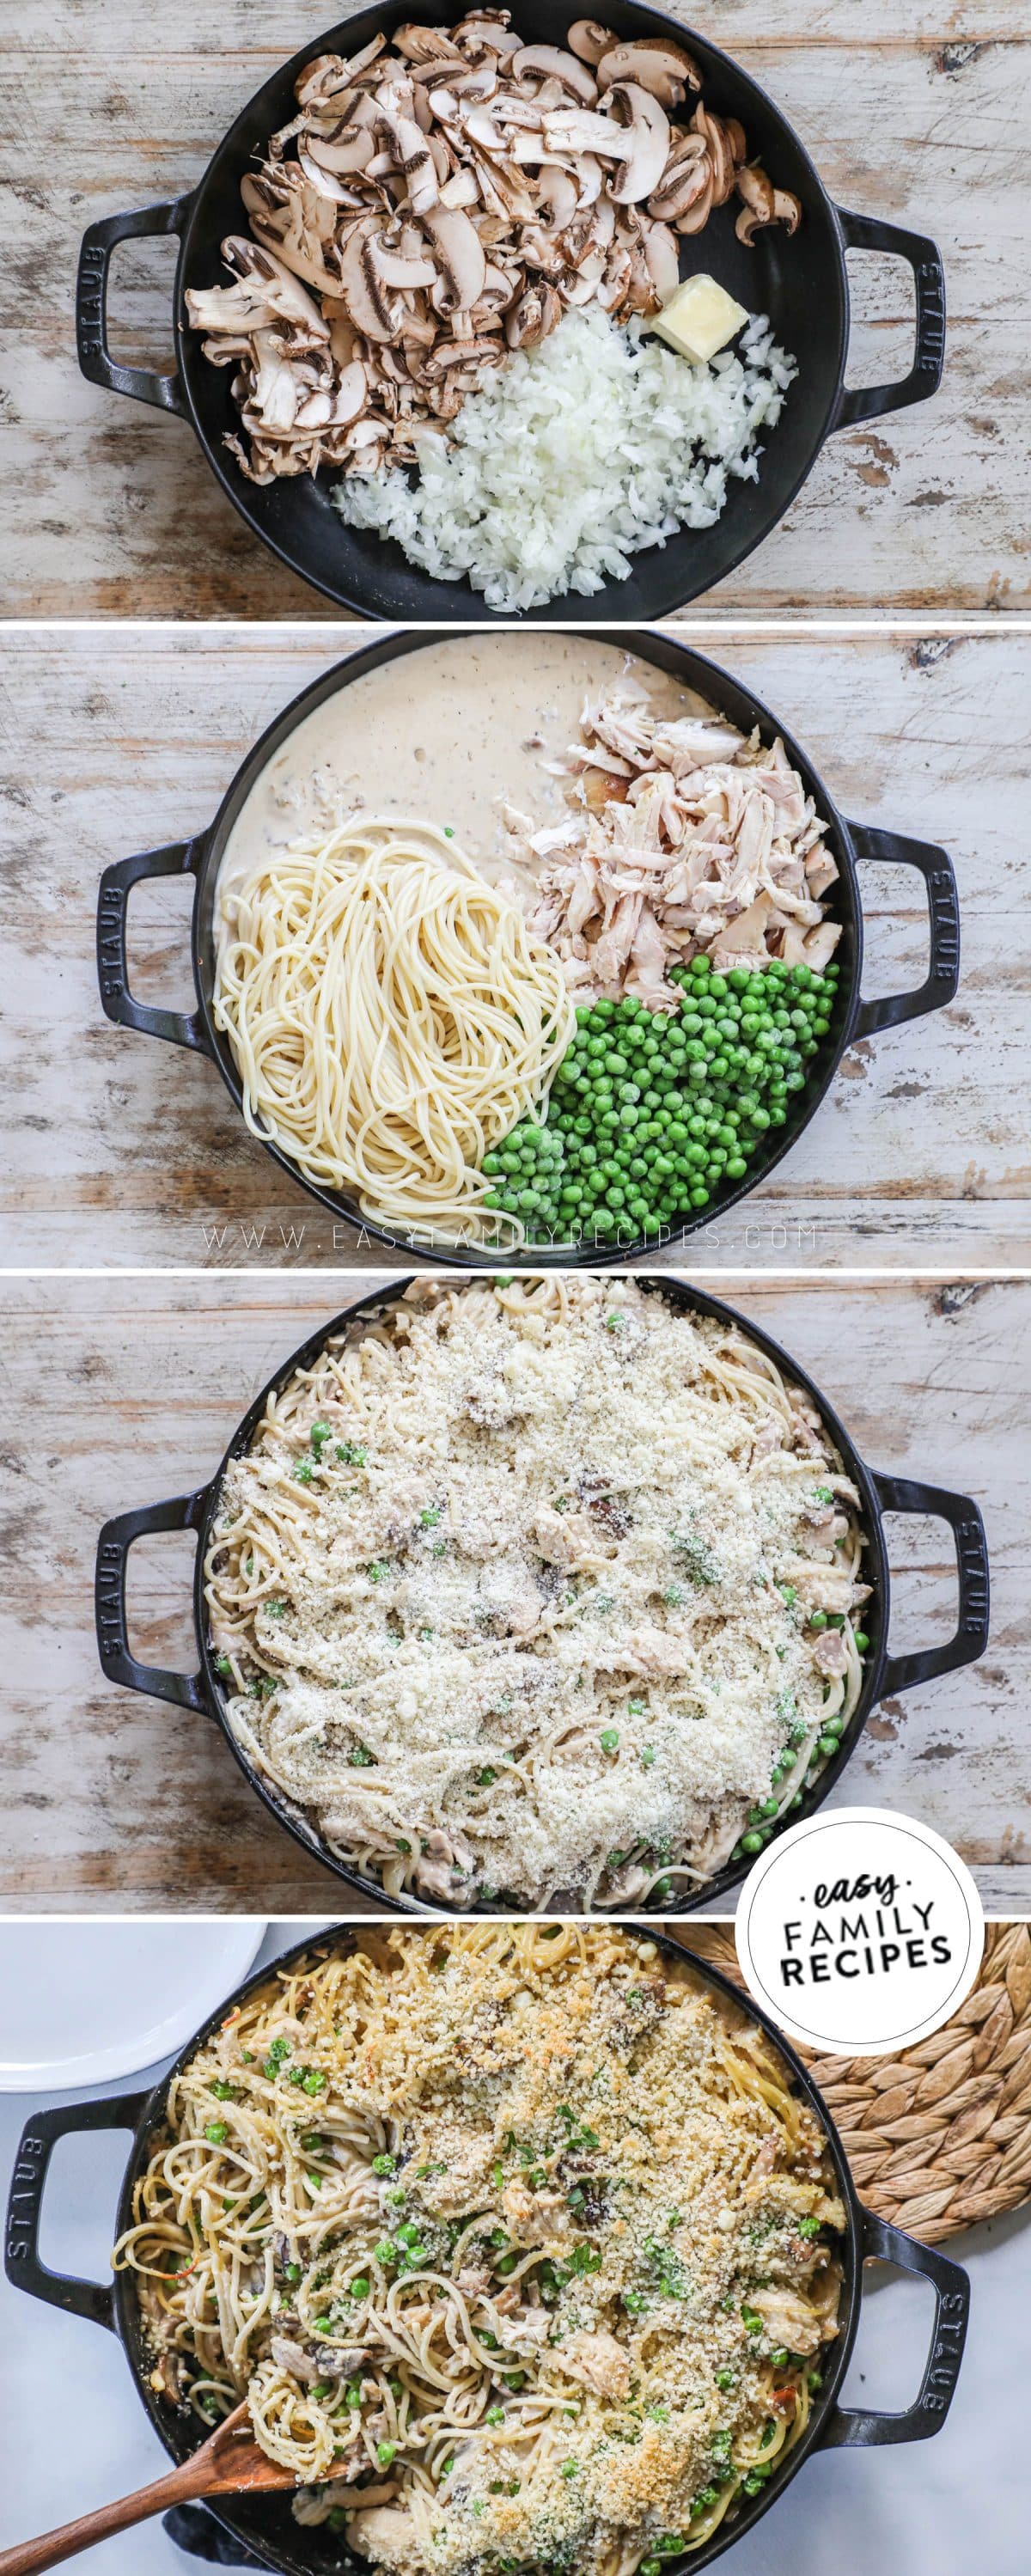 how to make chicken tetrazzini 1)saute mushrooms and onions 2)make sauce and add chicken, peas, and pasta 3)top with breadcrumbs 4)bake.